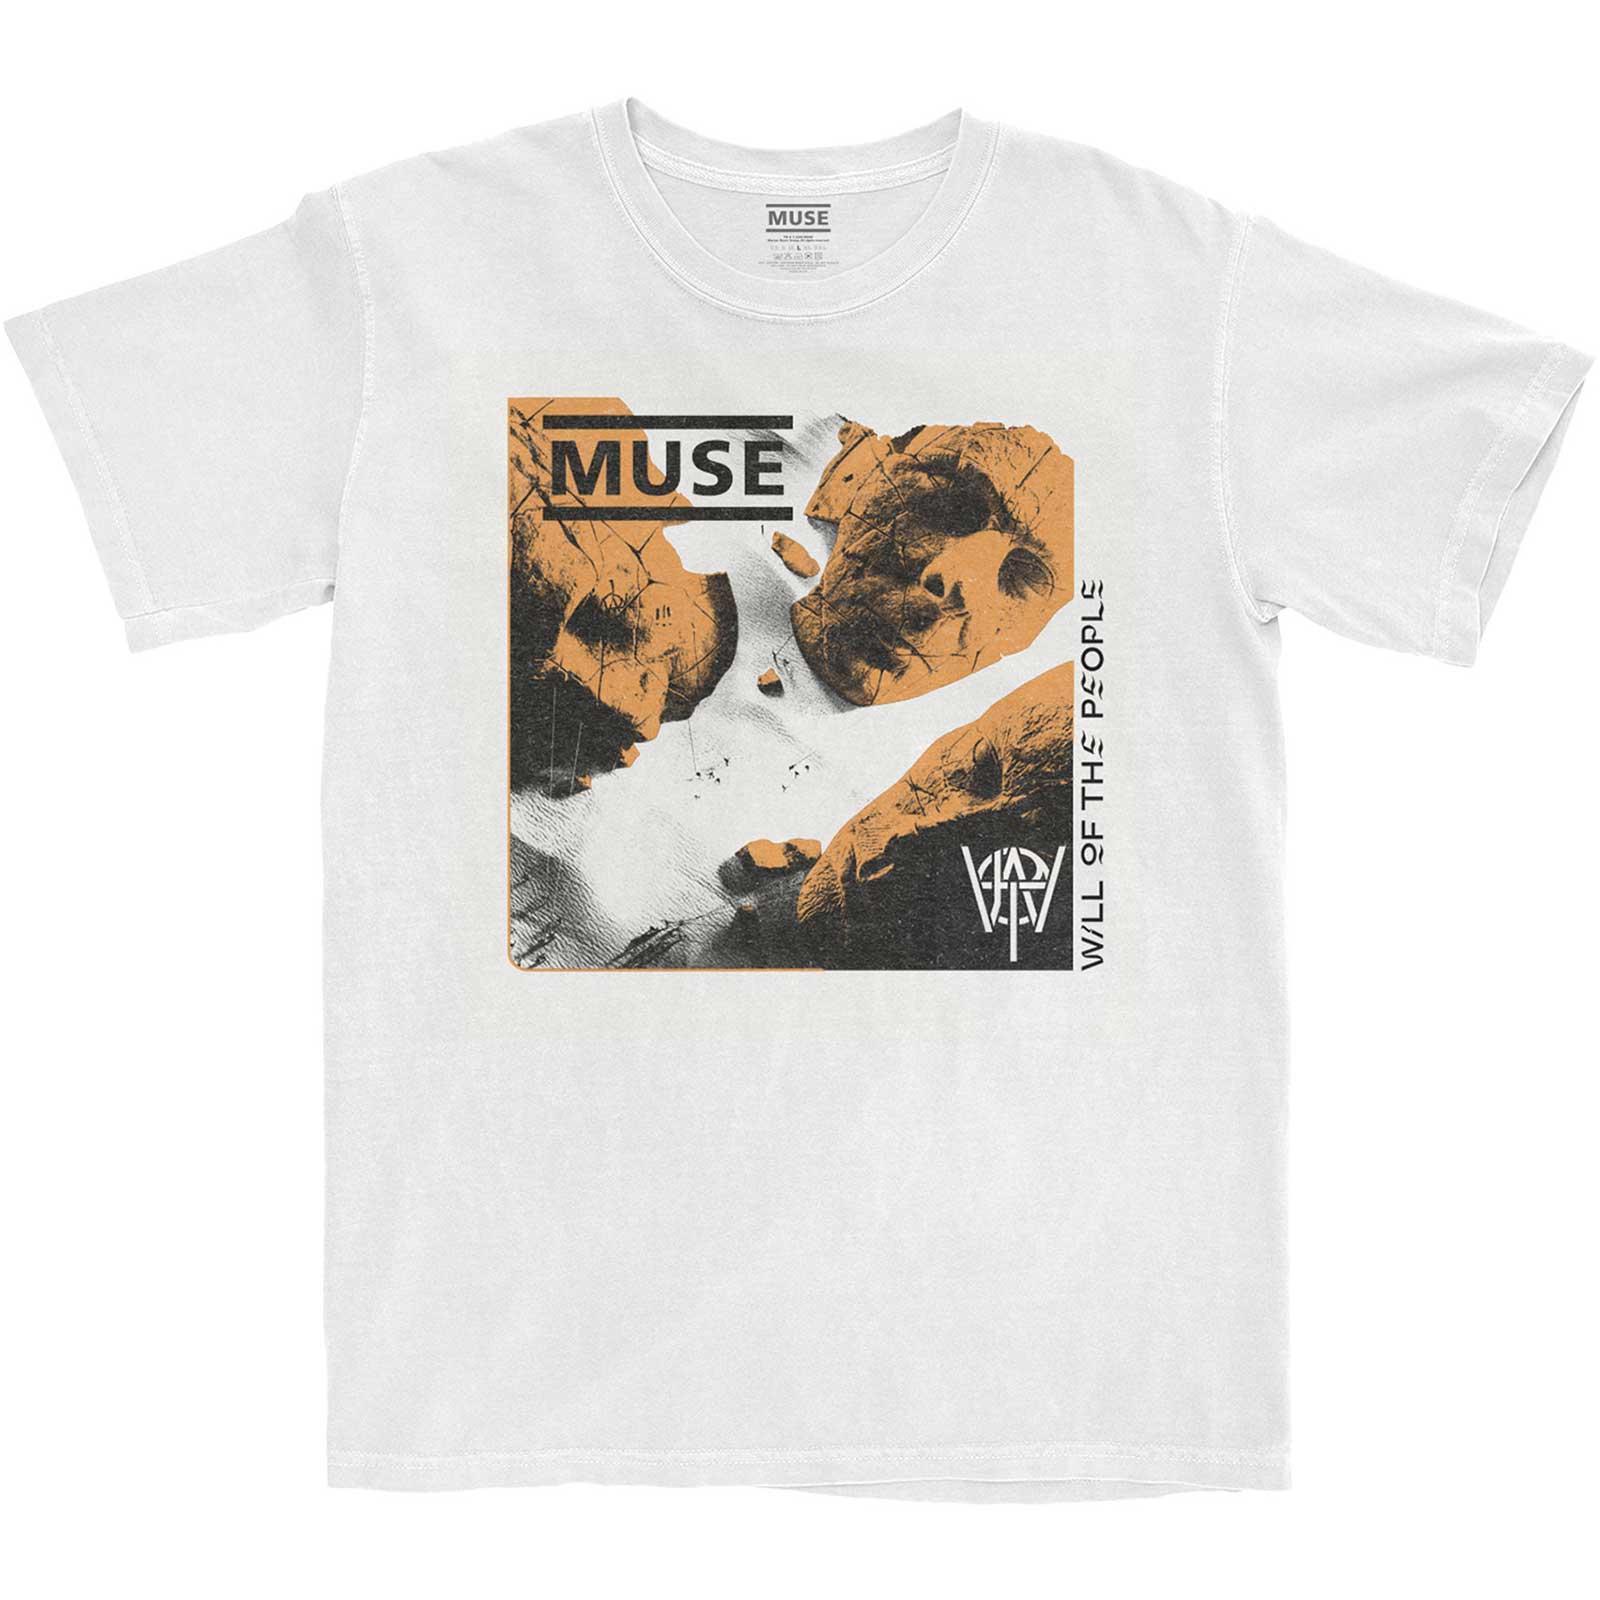 Muse Unisex Adult Will Of The People Cotton T-Shirt (White) (M)